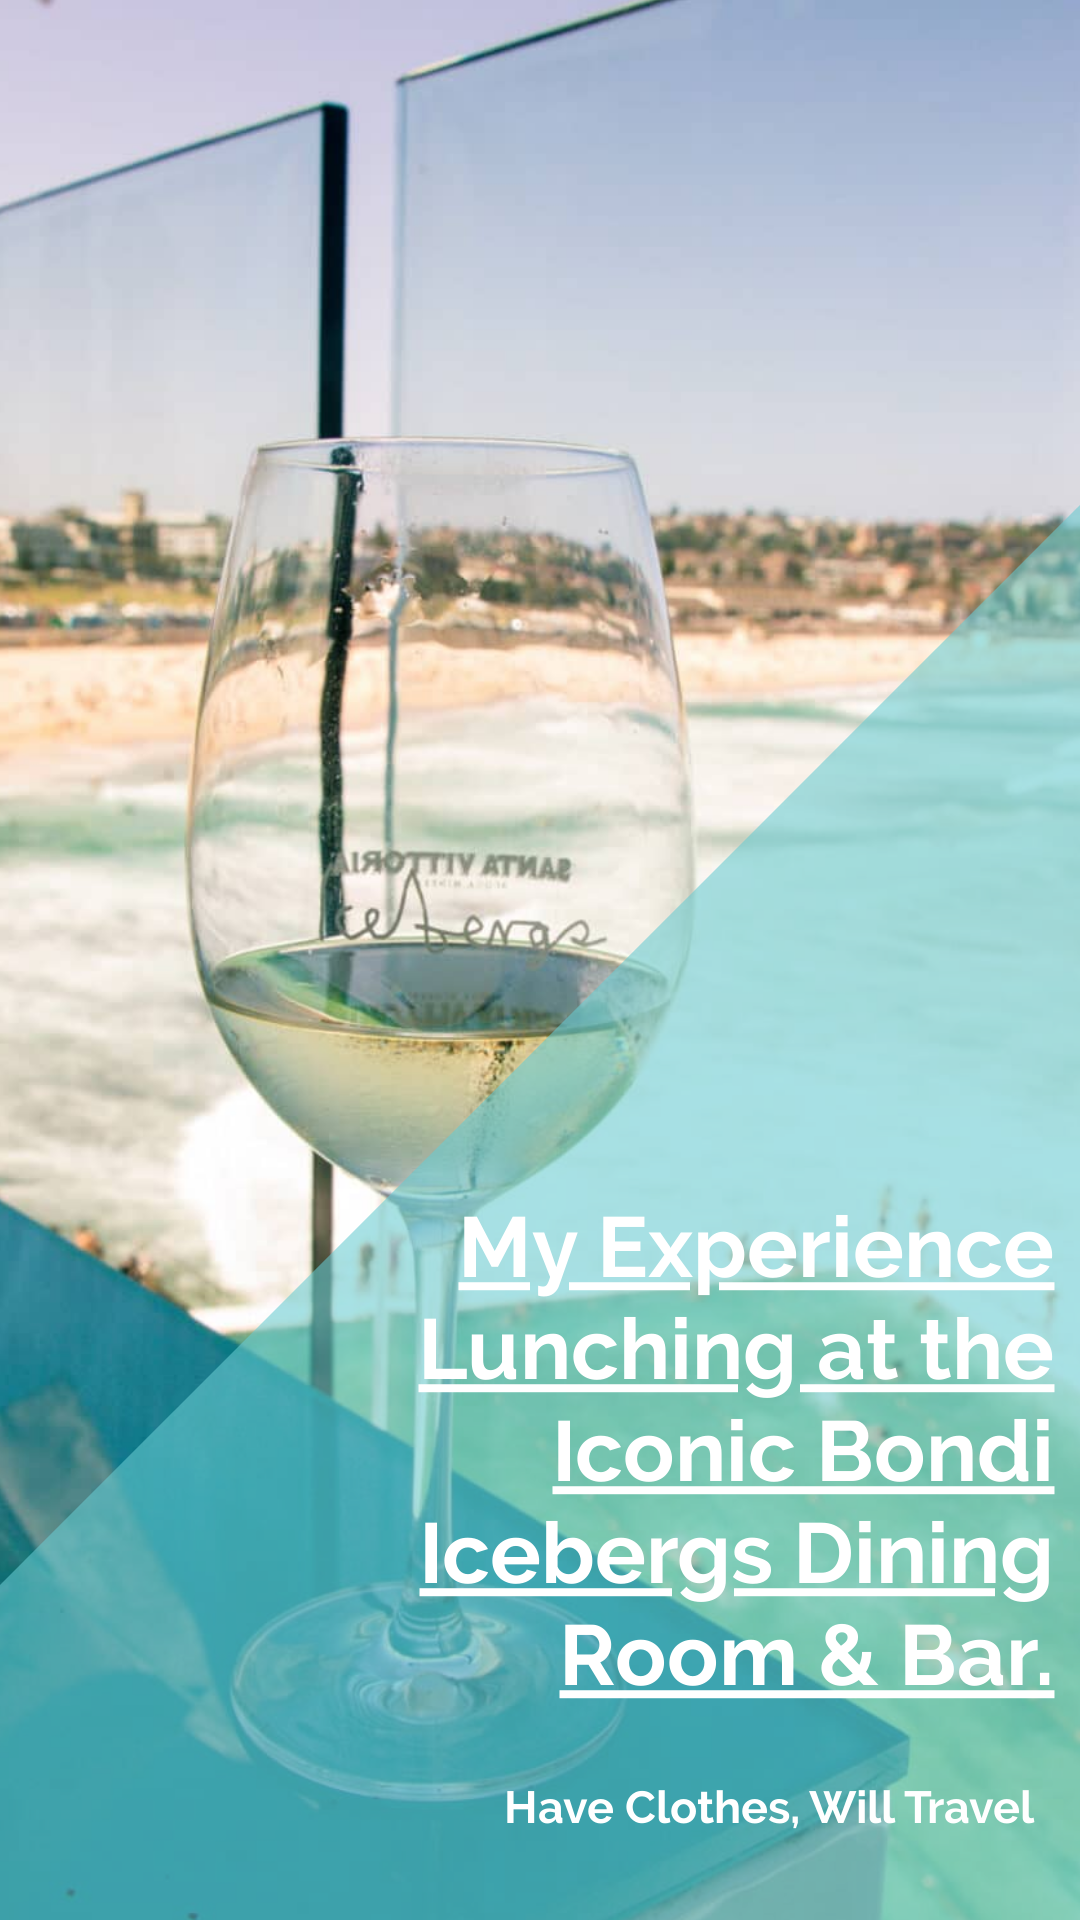 A wine glass on a table, with a view of Bondi Beach in Sydney in the background. White text on the image says, "My experience lunching at the iconic Bondi Icebergs dining room & bar"